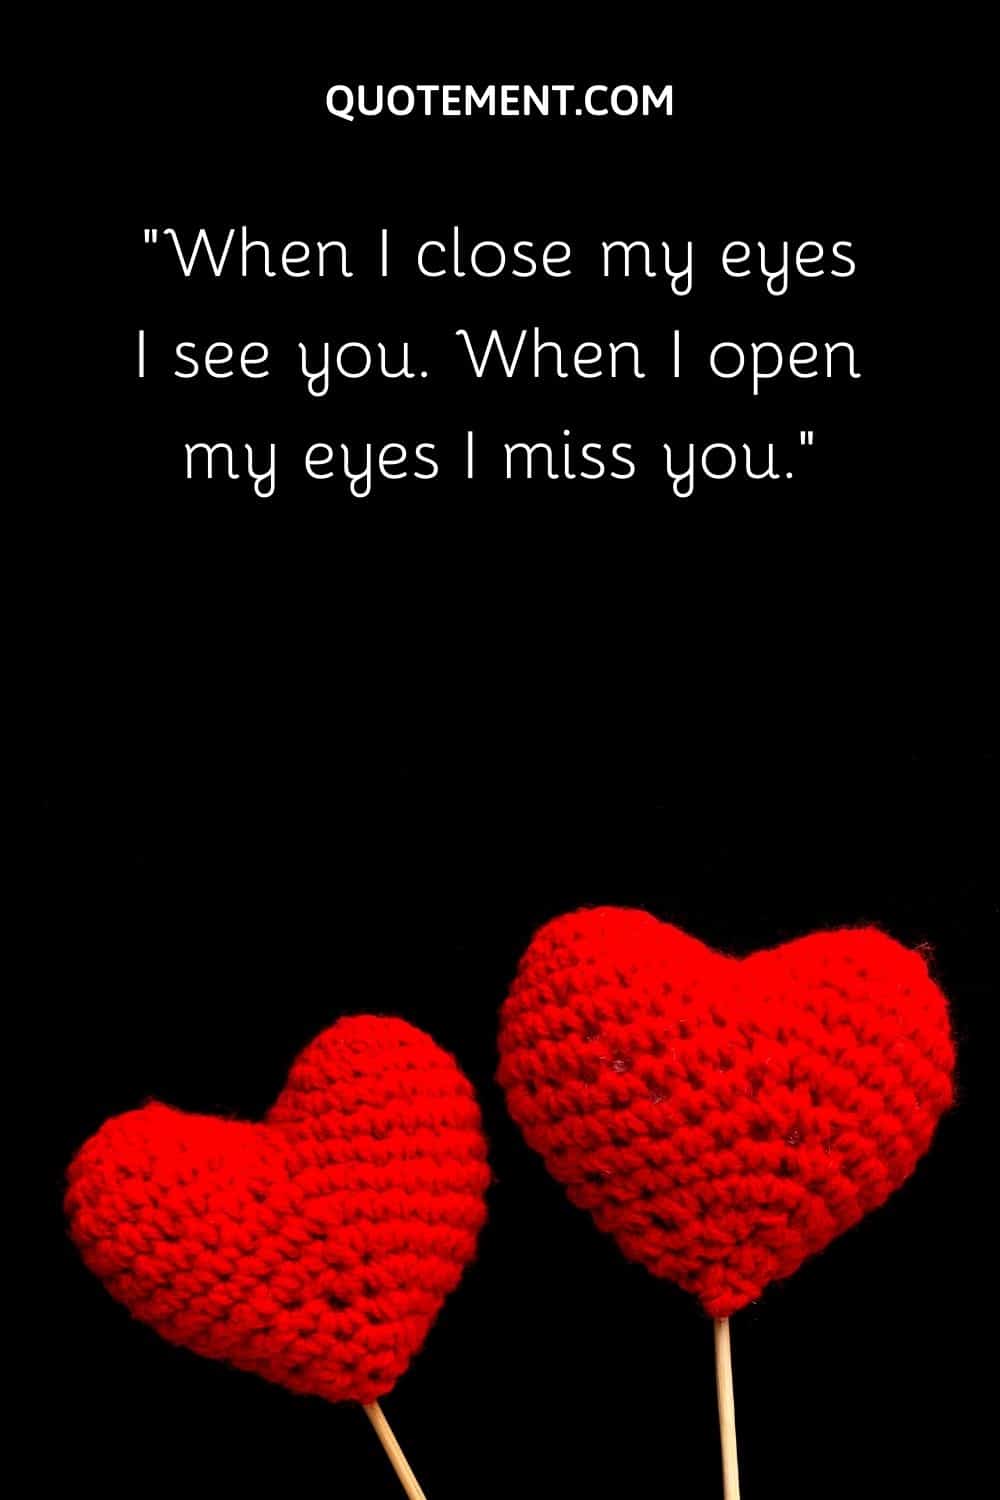 When I close my eyes I see you. When I open my eyes I miss you.